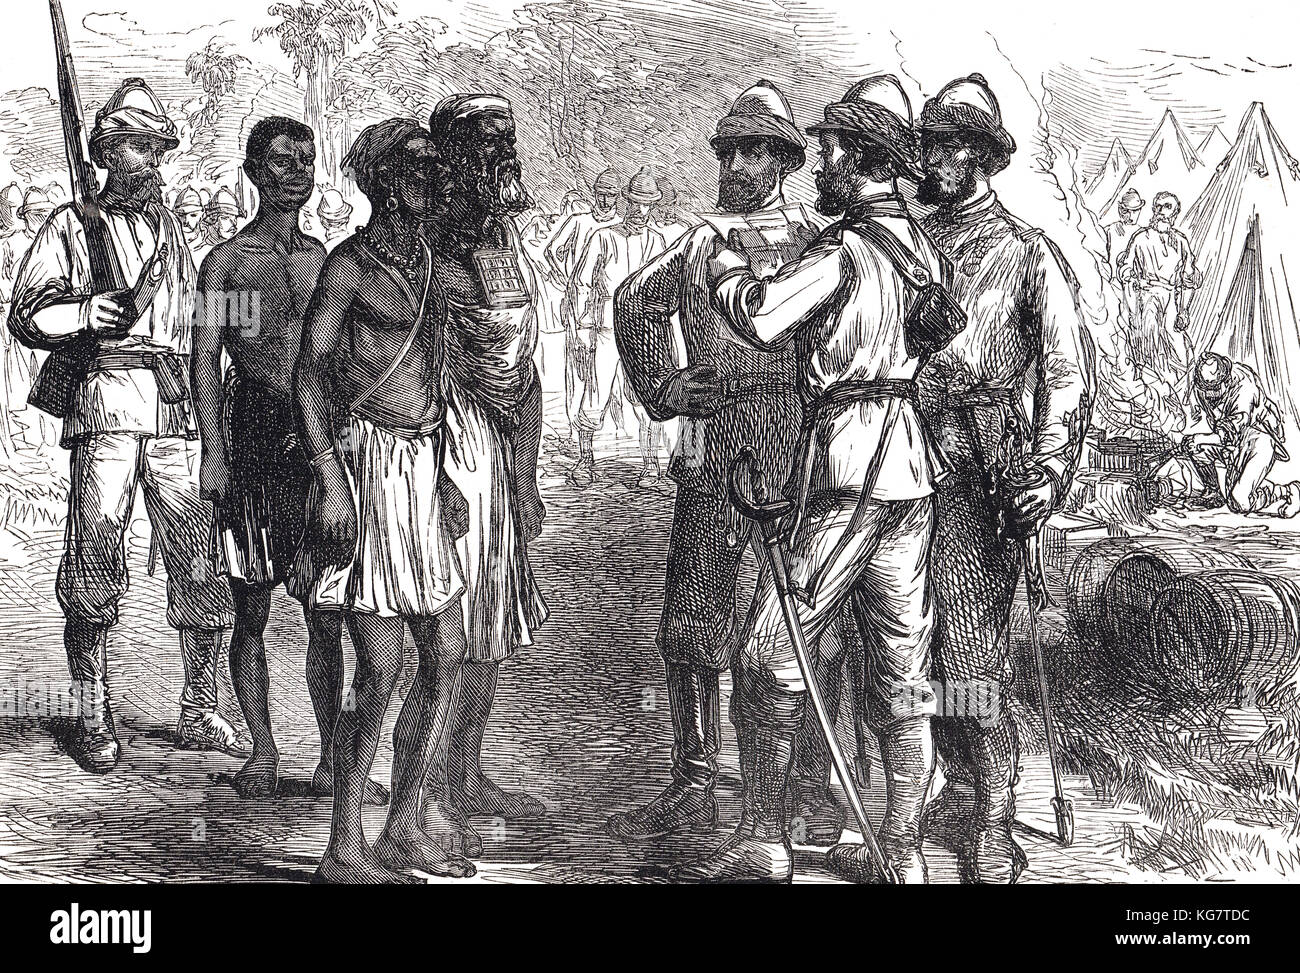 TReception of King Koffee's Botschafter in the English Camp, Third Anglo-Ashanti war, First Ashanti Expedition, 1873-1874 Stockfoto